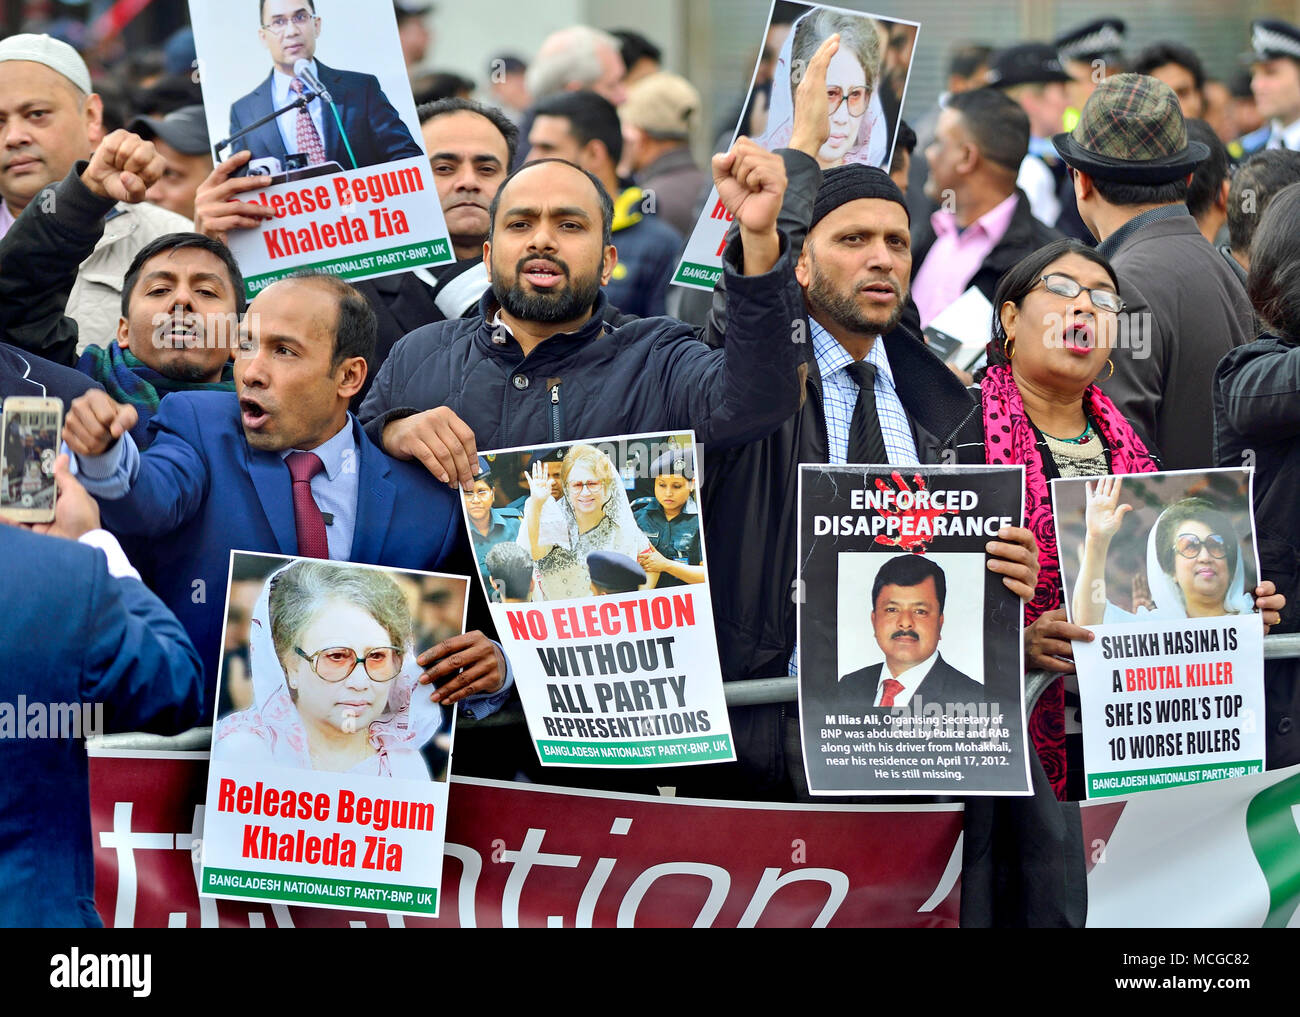 London, UK. 16th April 2018. Bangladeshi protesters opposite the Queen Elizabeth Conference Centre at the start of the Commonwealth Heads of Government Conference Credit: PjrNews/Alamy Live News Stock Photo